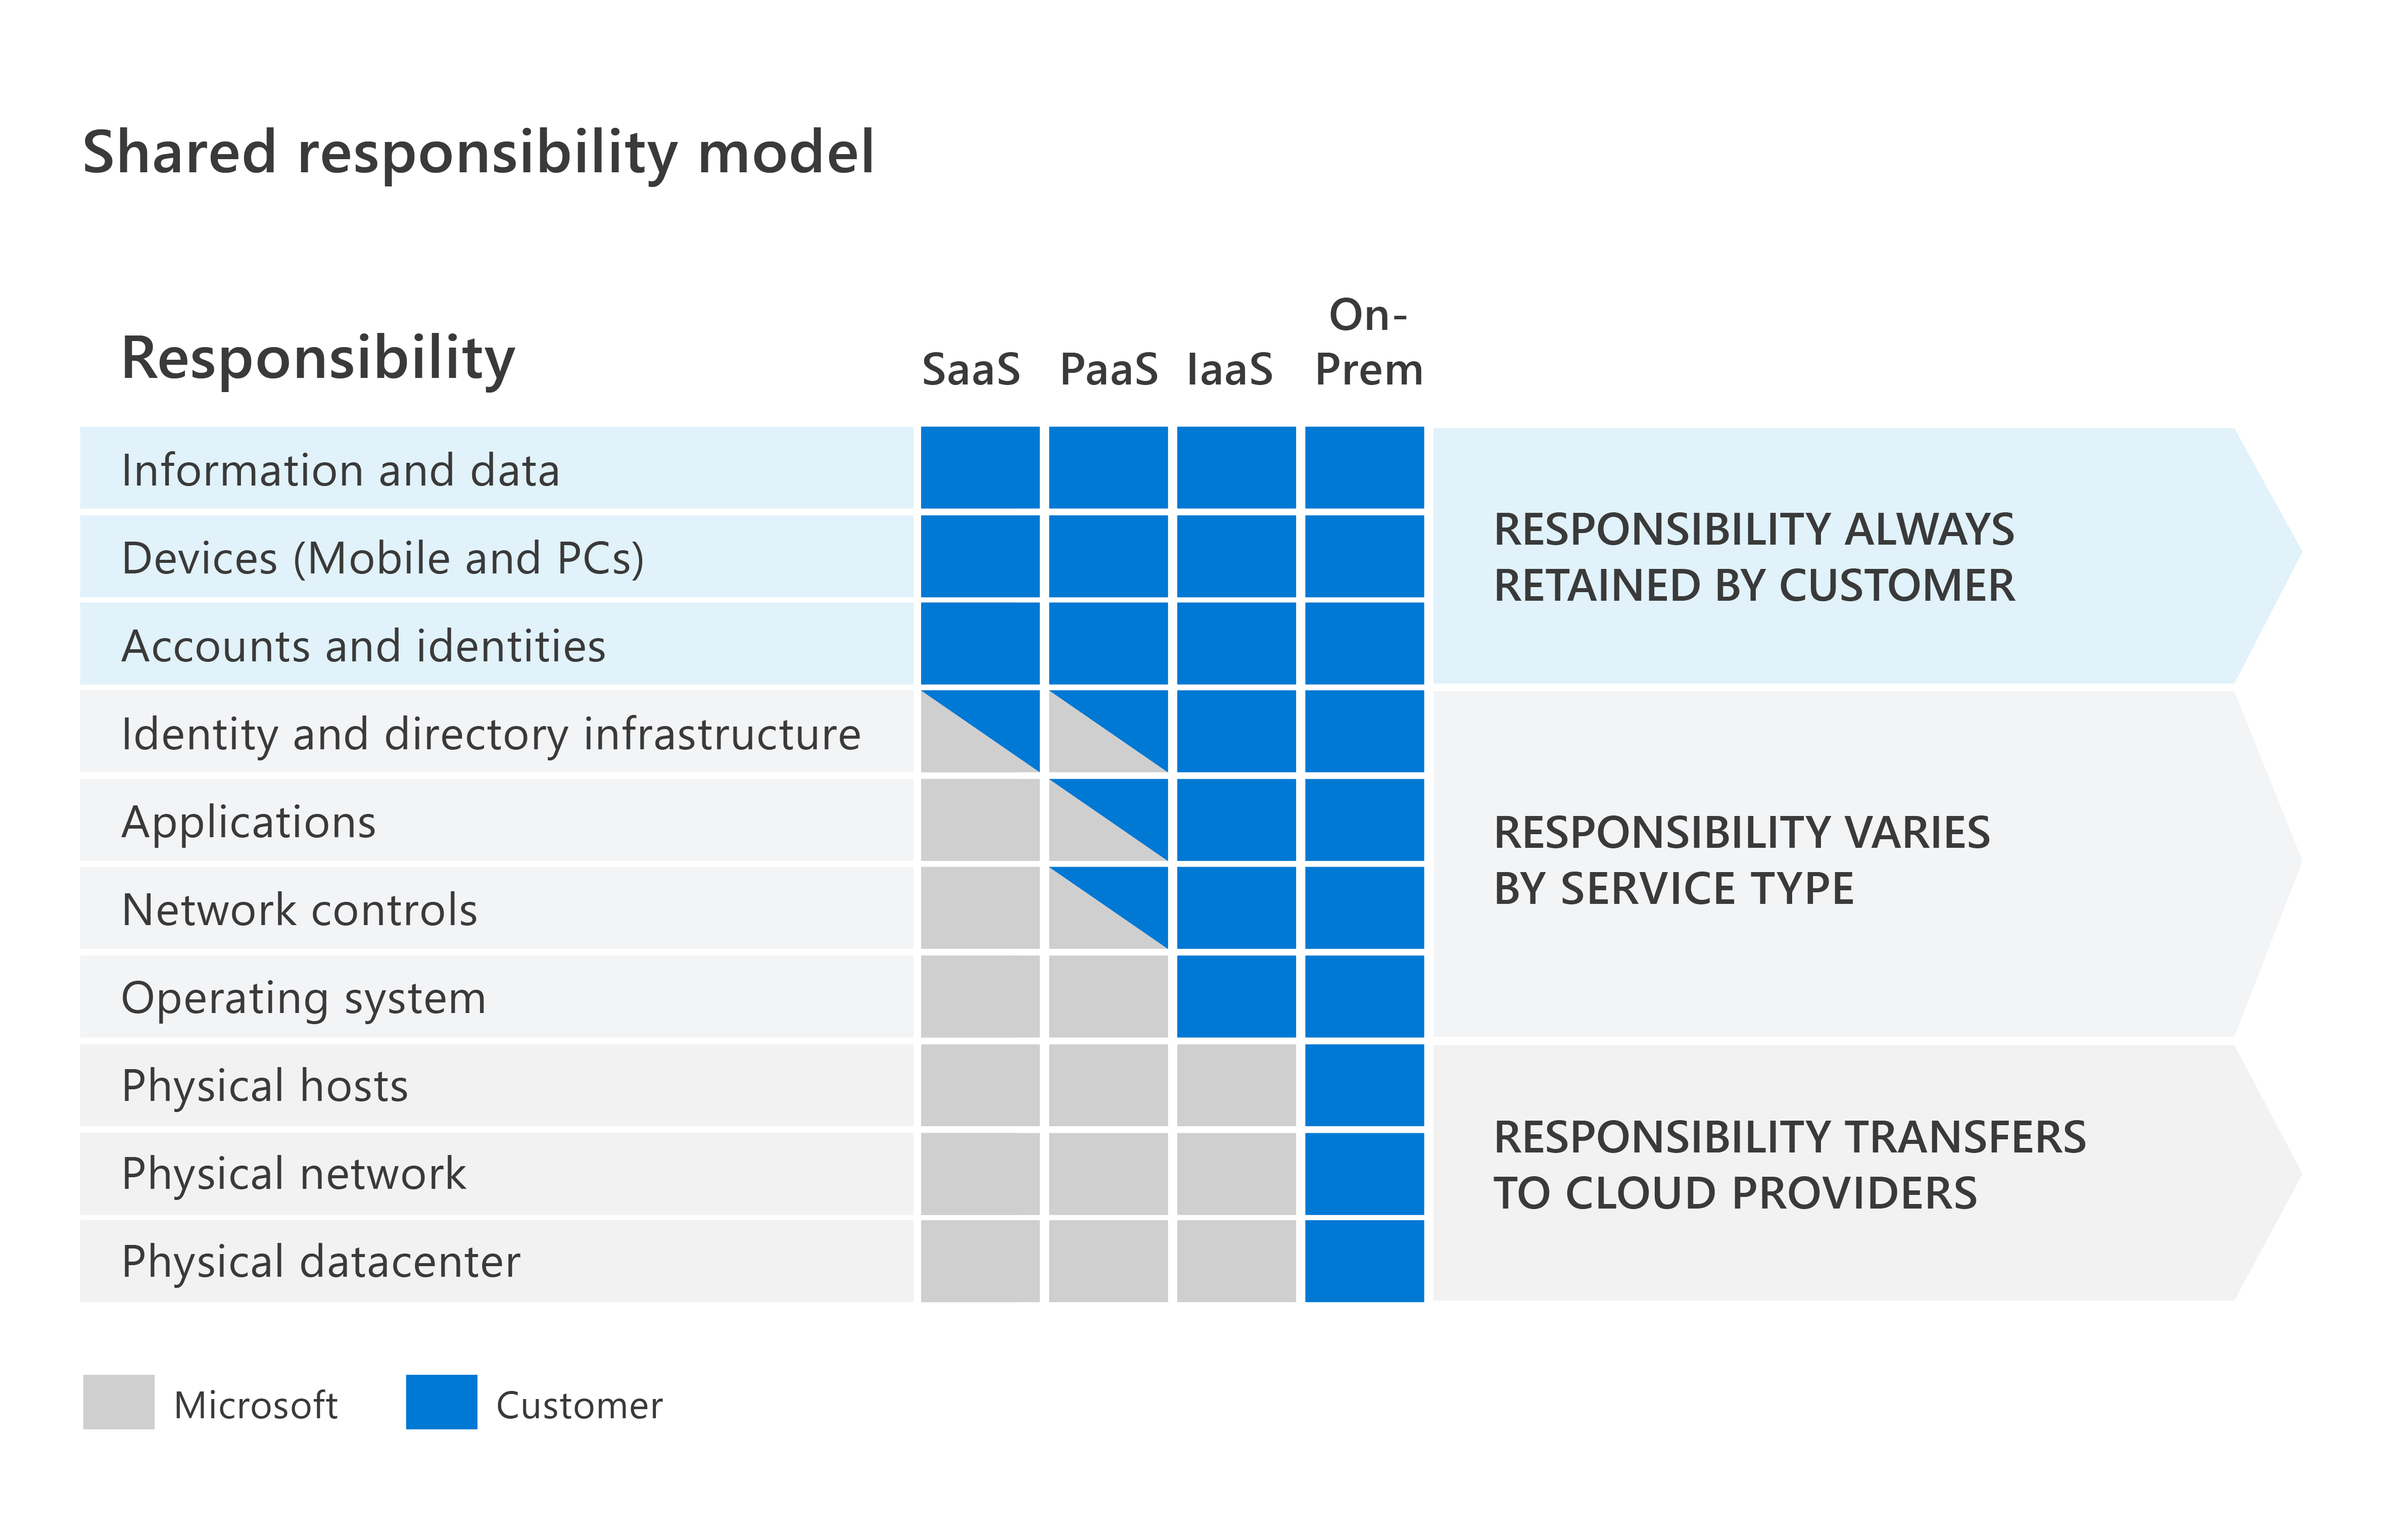 The Shared responsibility model responsibilities by type